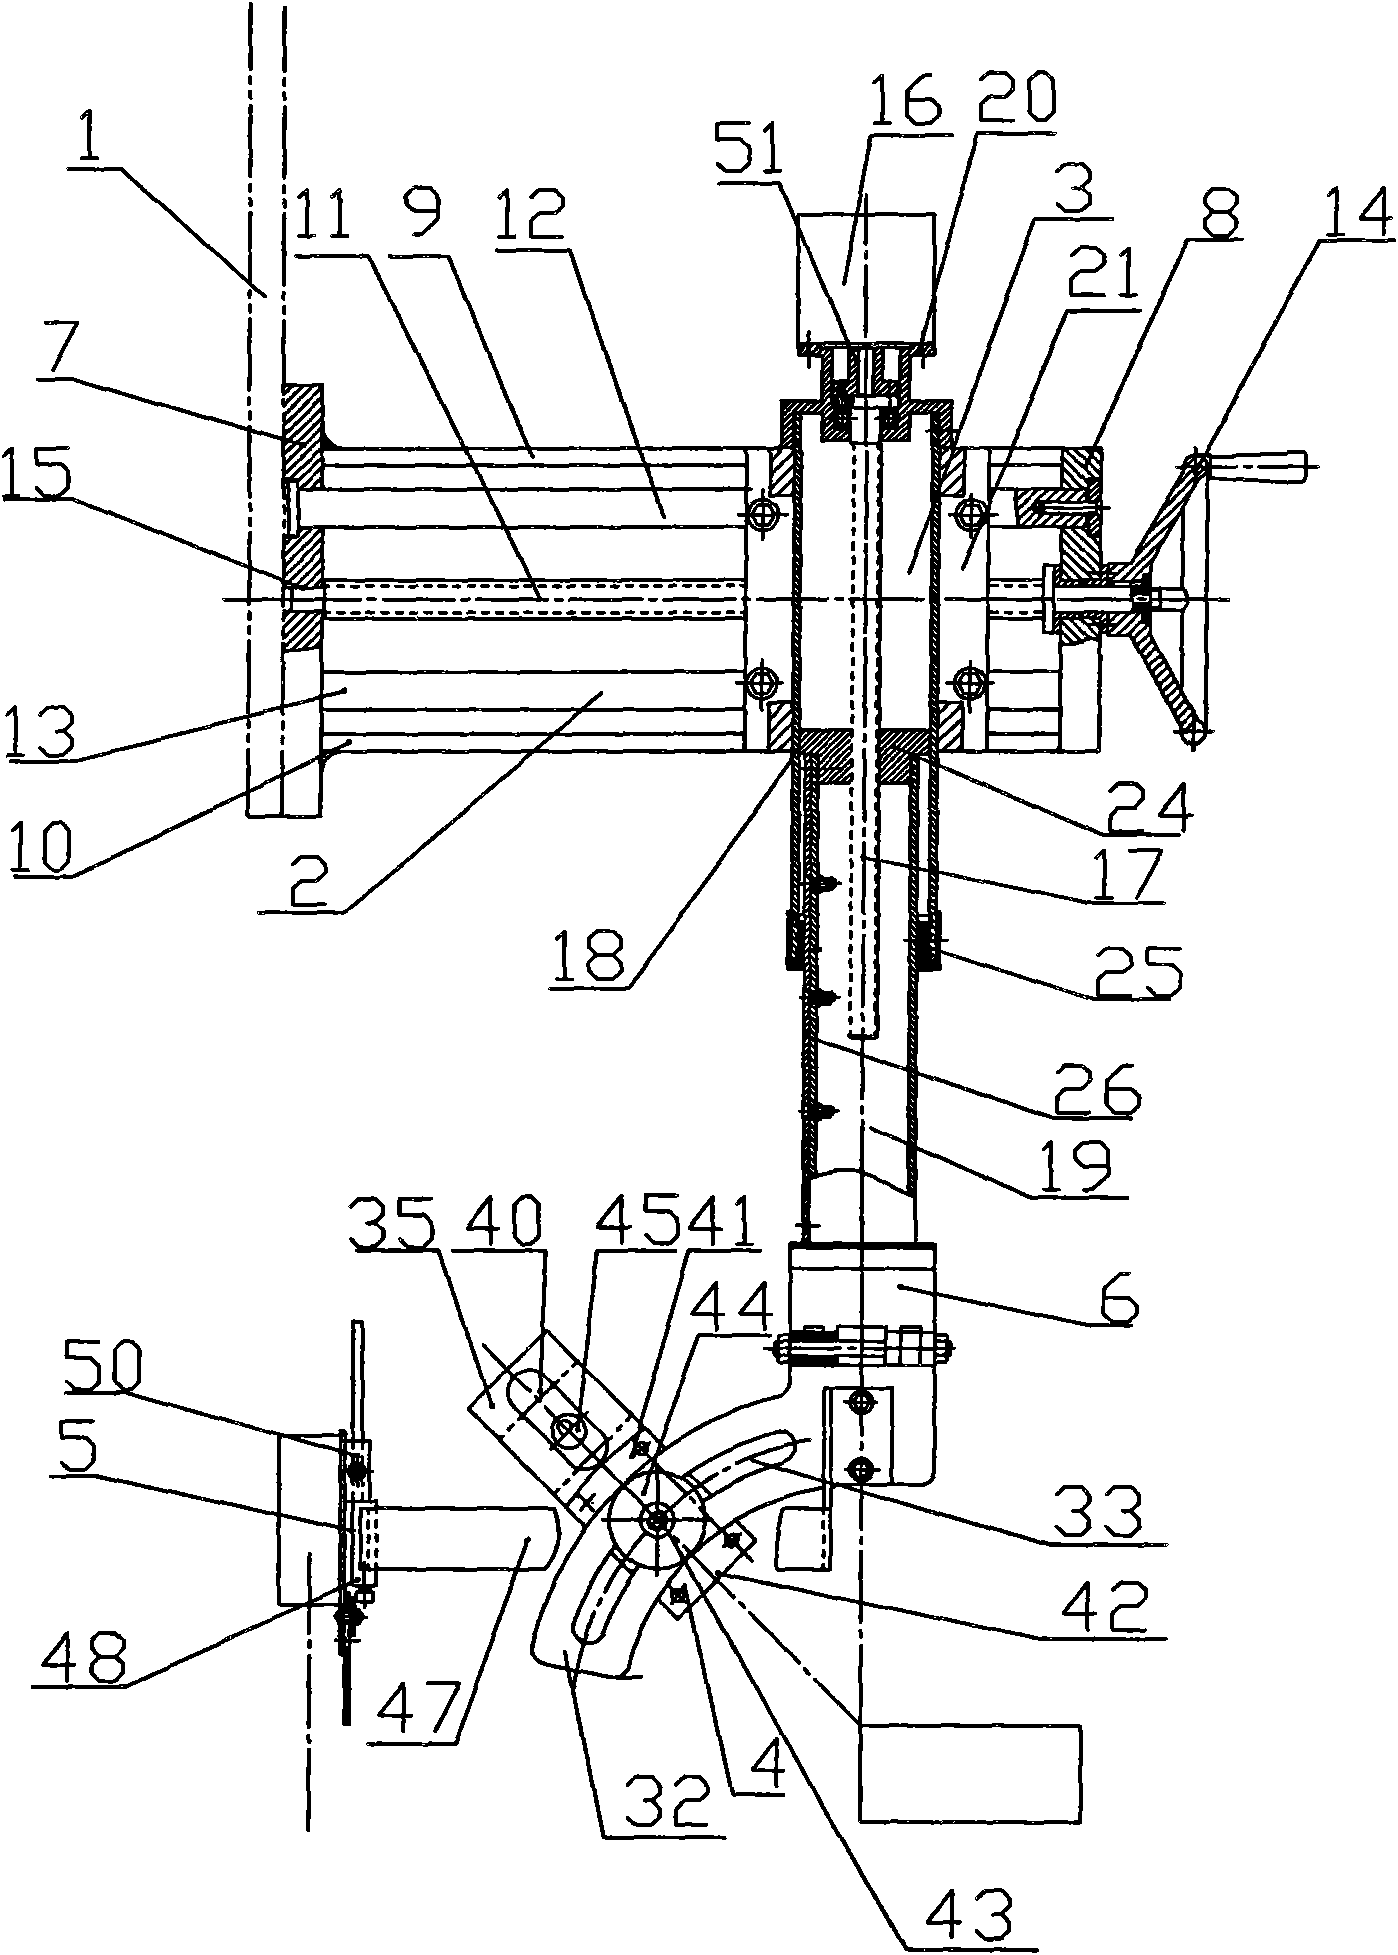 Device for detecting welding track of corrugated plate of container based on laser ranging